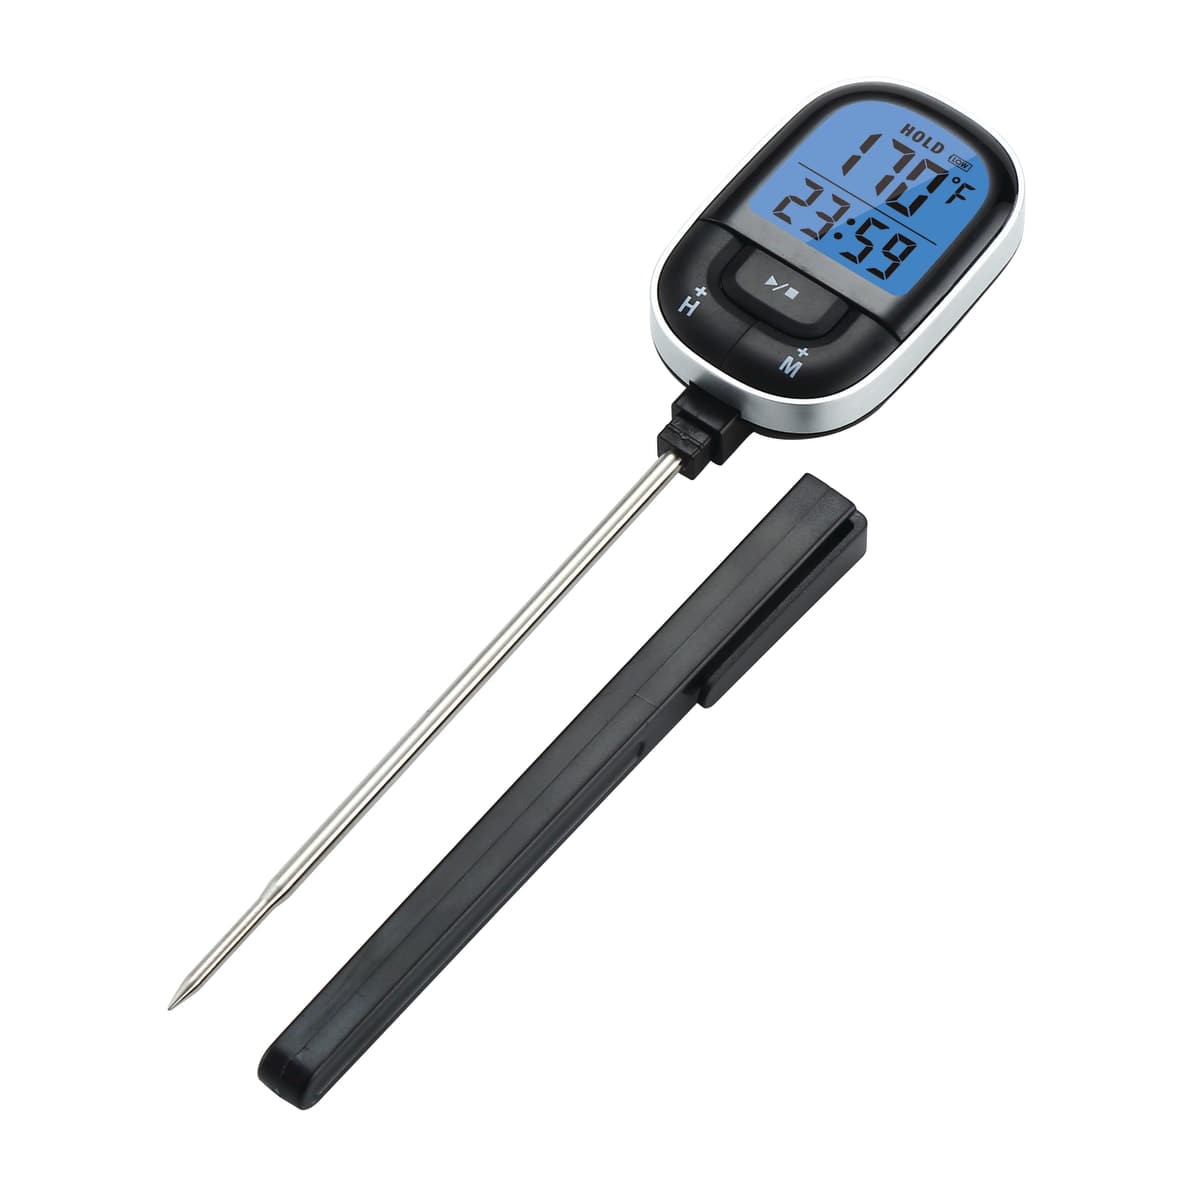 BARBECUE THERMOMETER - best price from Maltashopper.com BR500009599